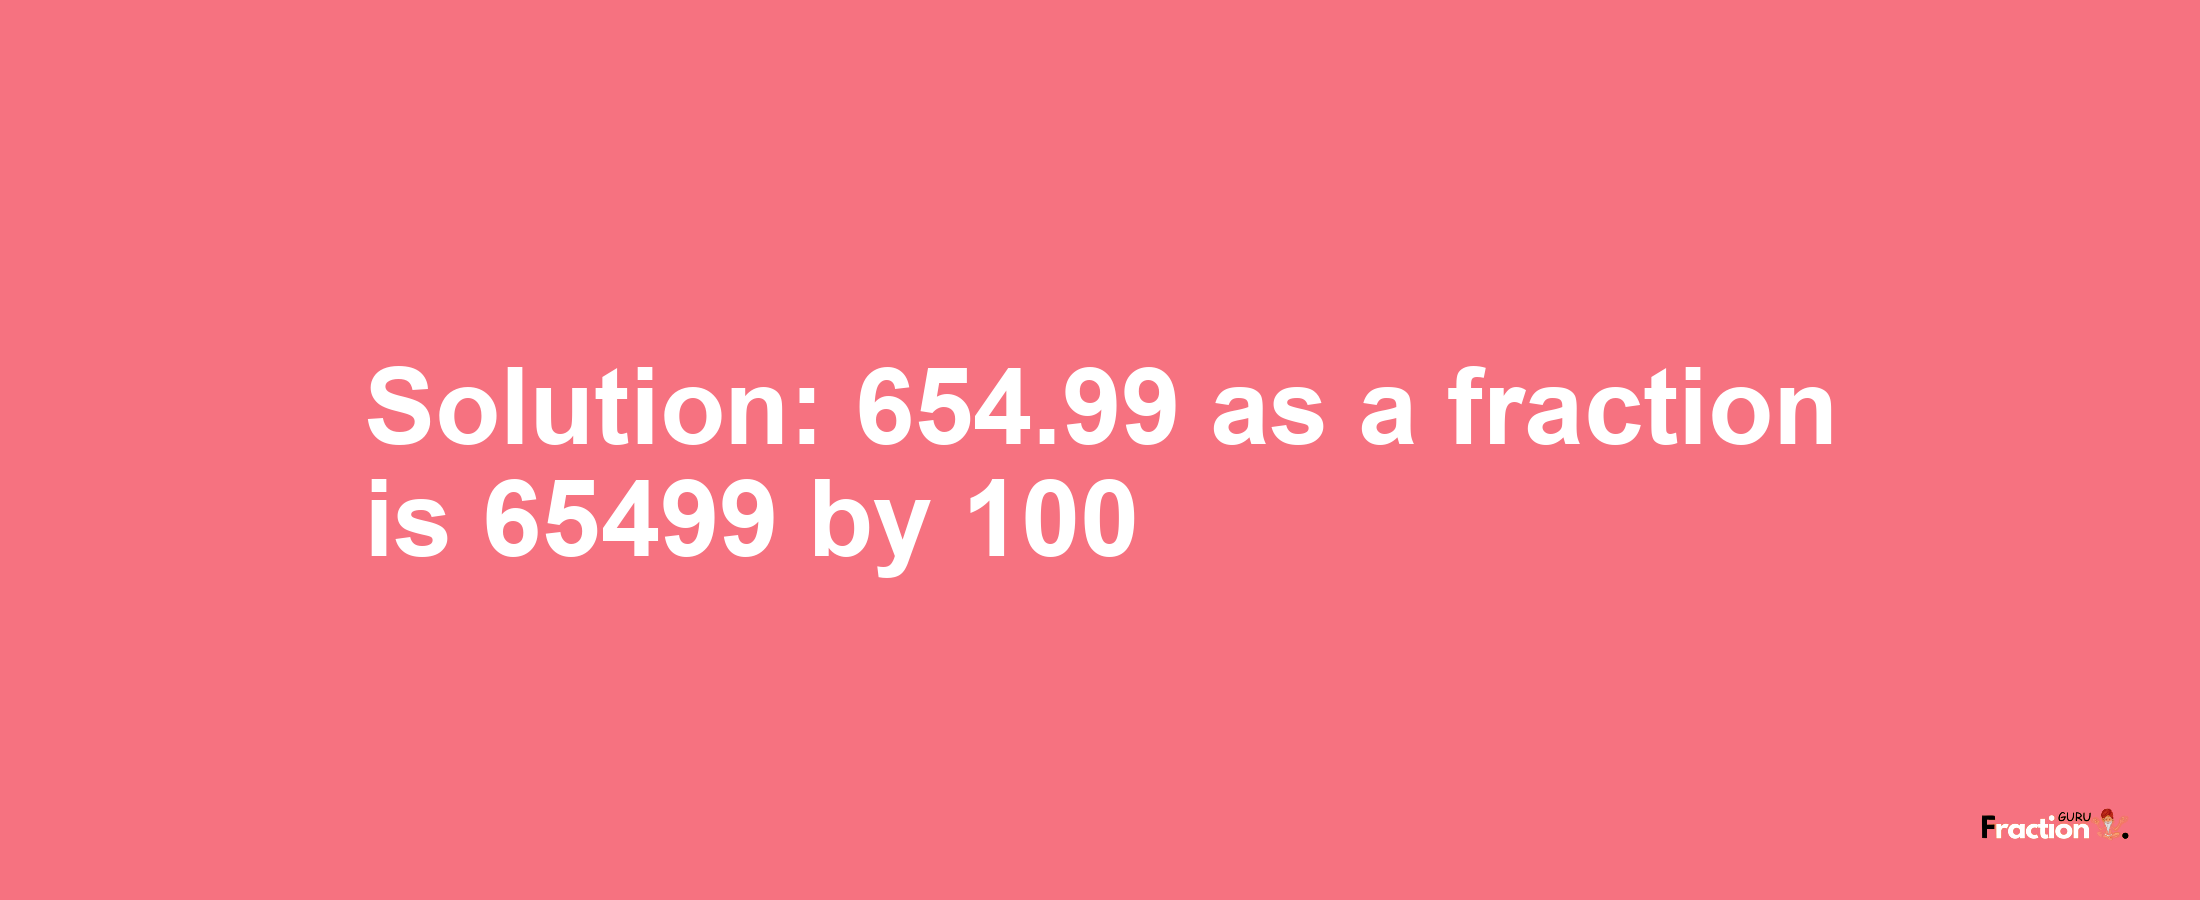 Solution:654.99 as a fraction is 65499/100